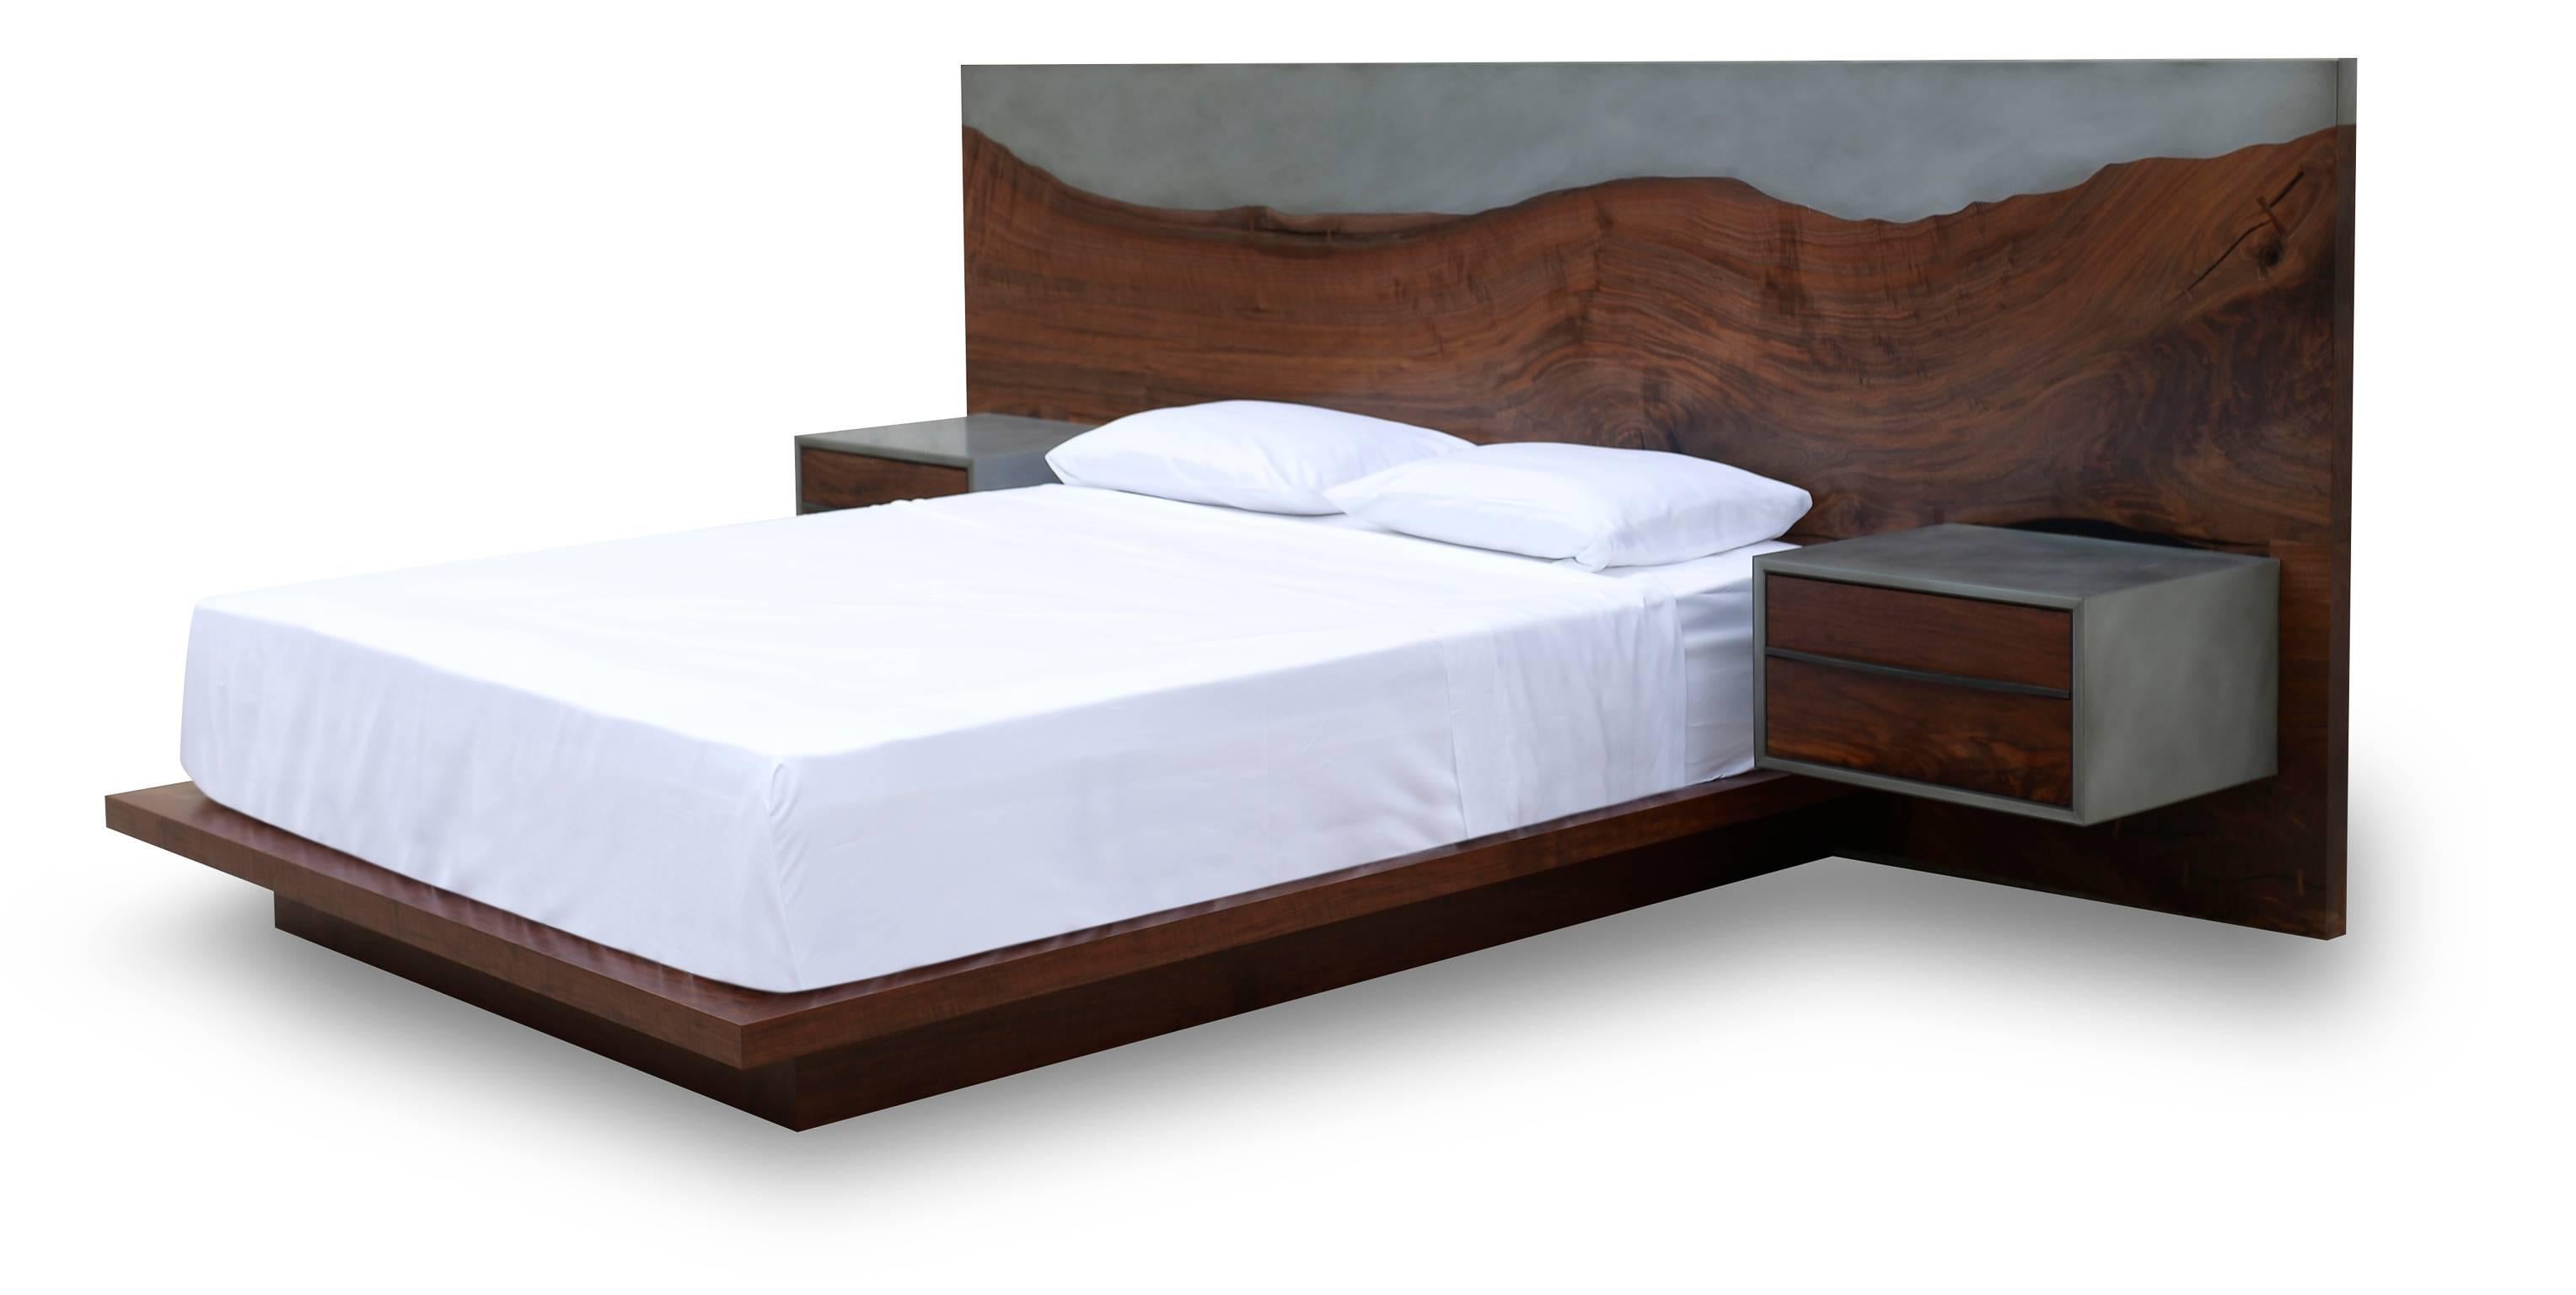 The striking and beautiful Nola bed is our take on the live-edge style. The headboard features a hand-picked solid slab of claro walnut and a zinc encased in epoxy resin edge that has been cut with precision and flawlessly affixed to the curves of